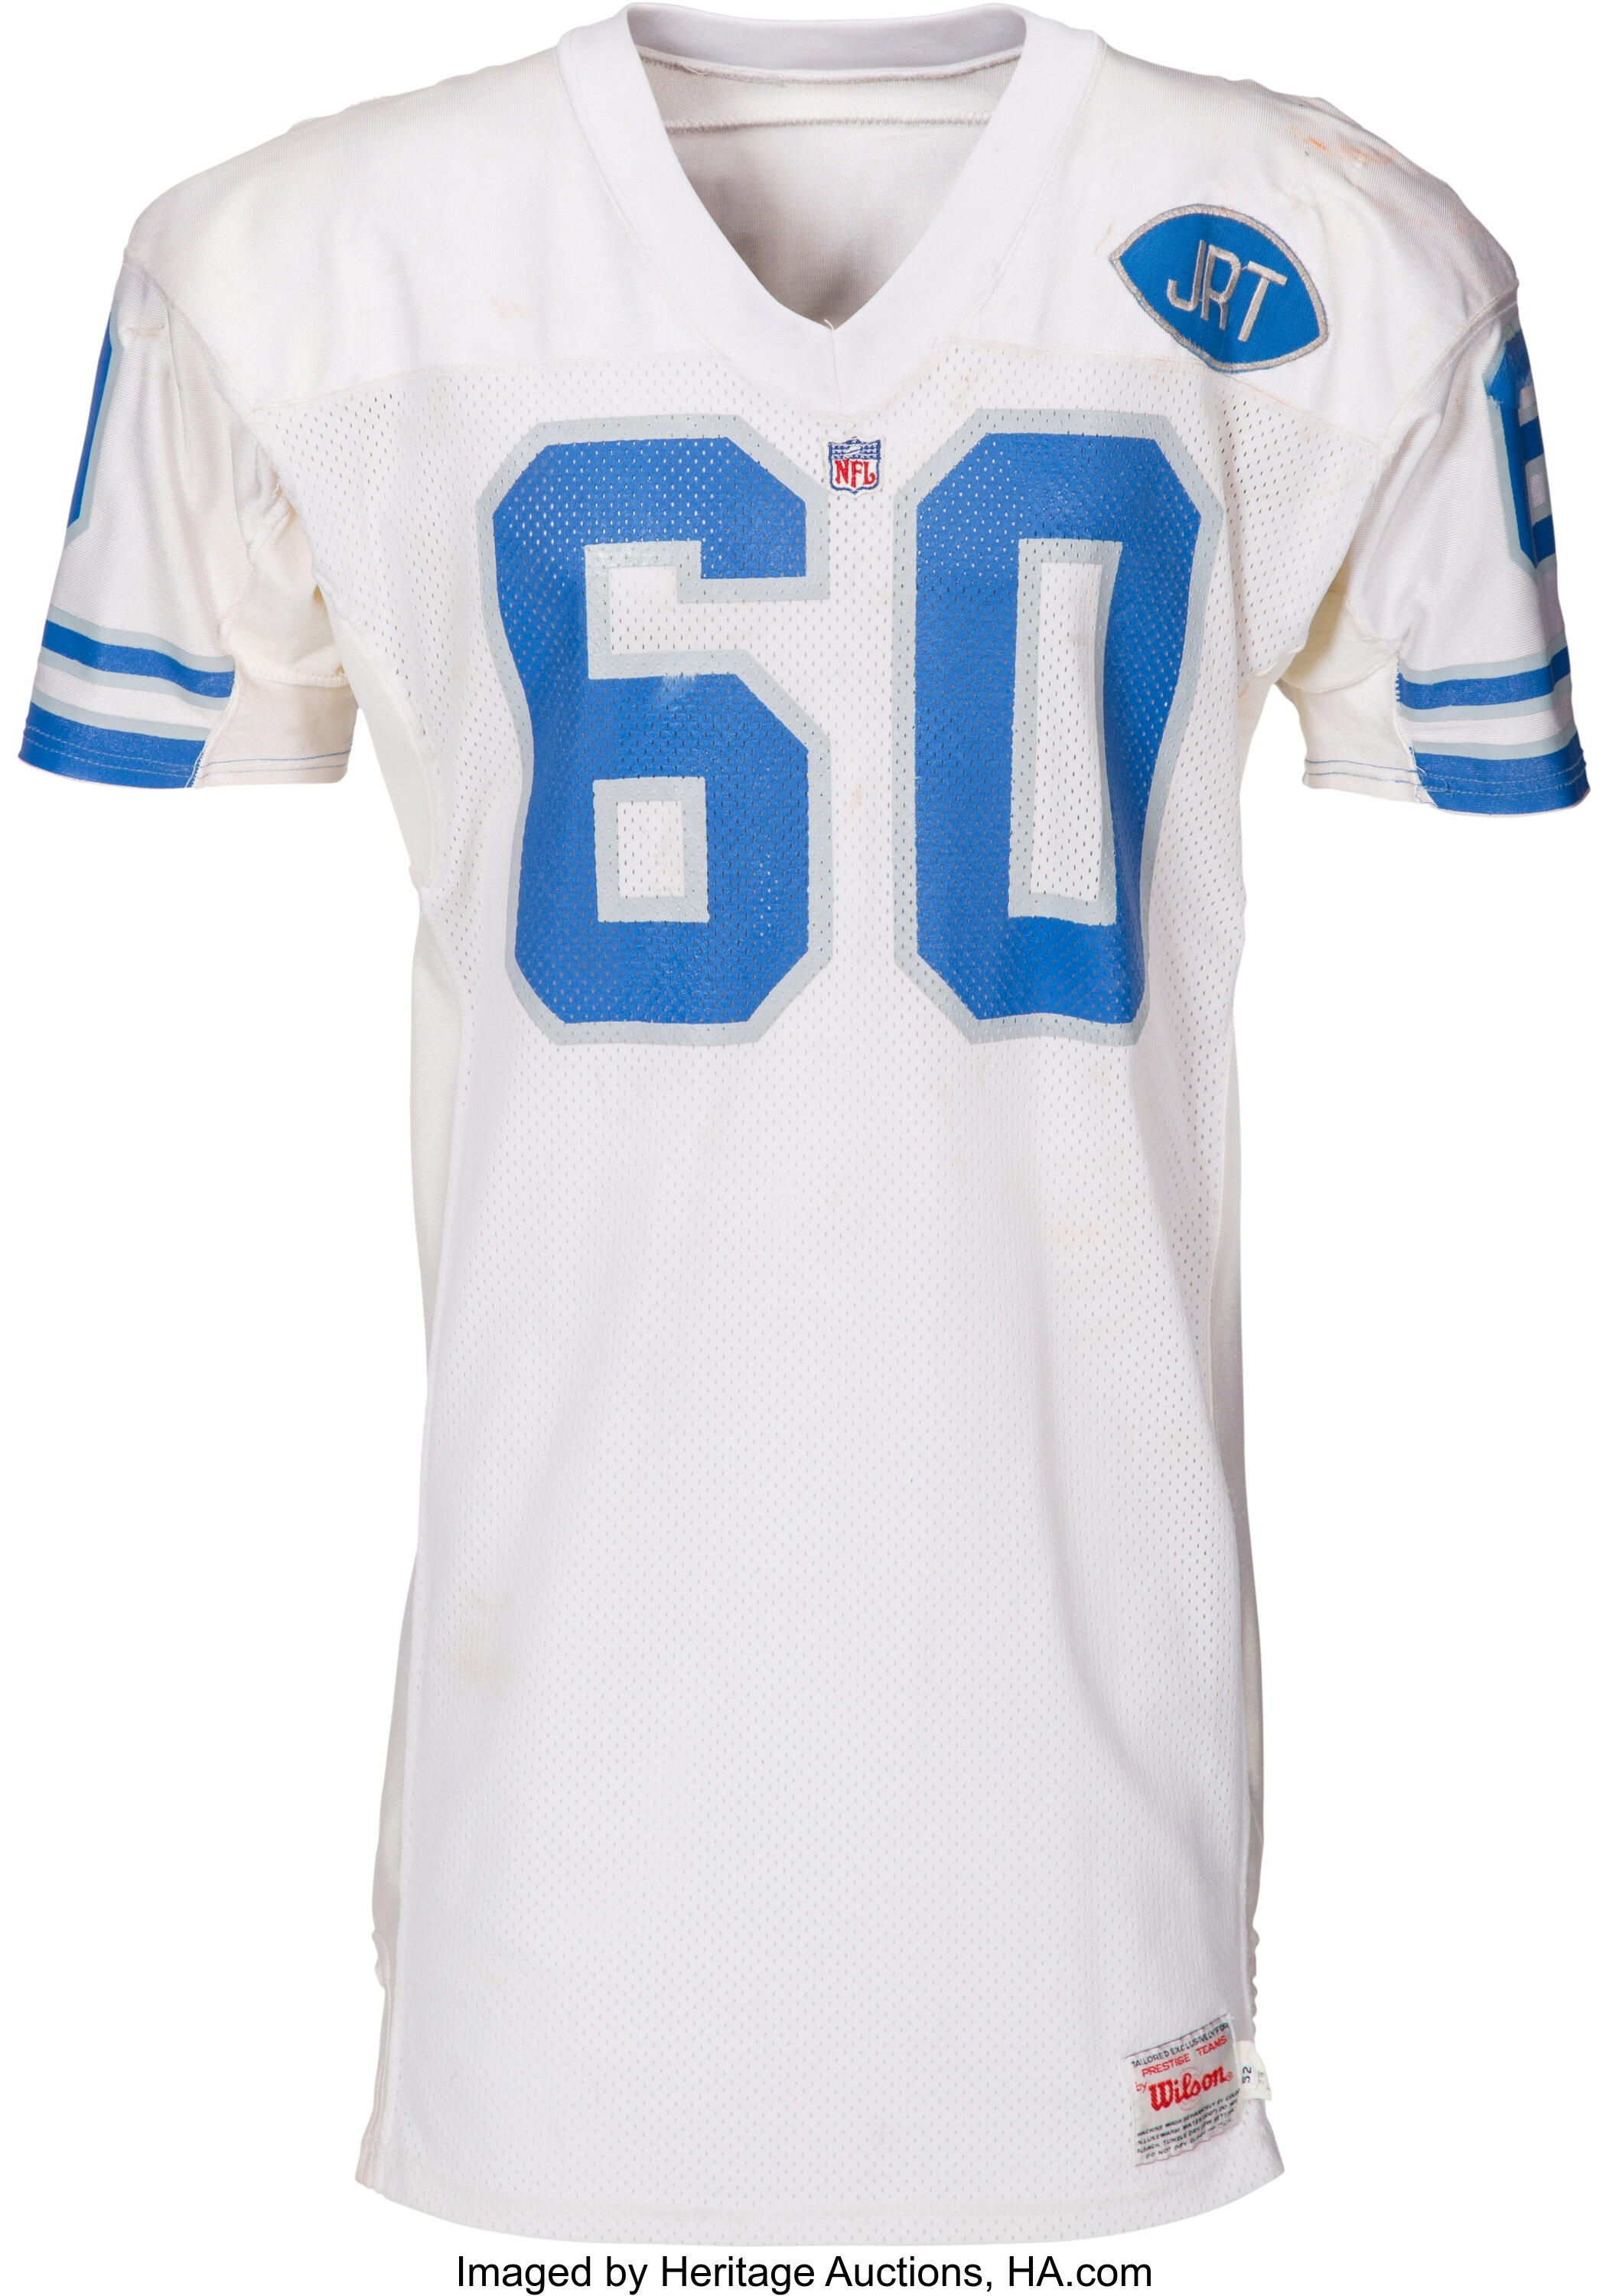 1991 Mike Utley Game Worn, Signed Detroit Lions Jersey